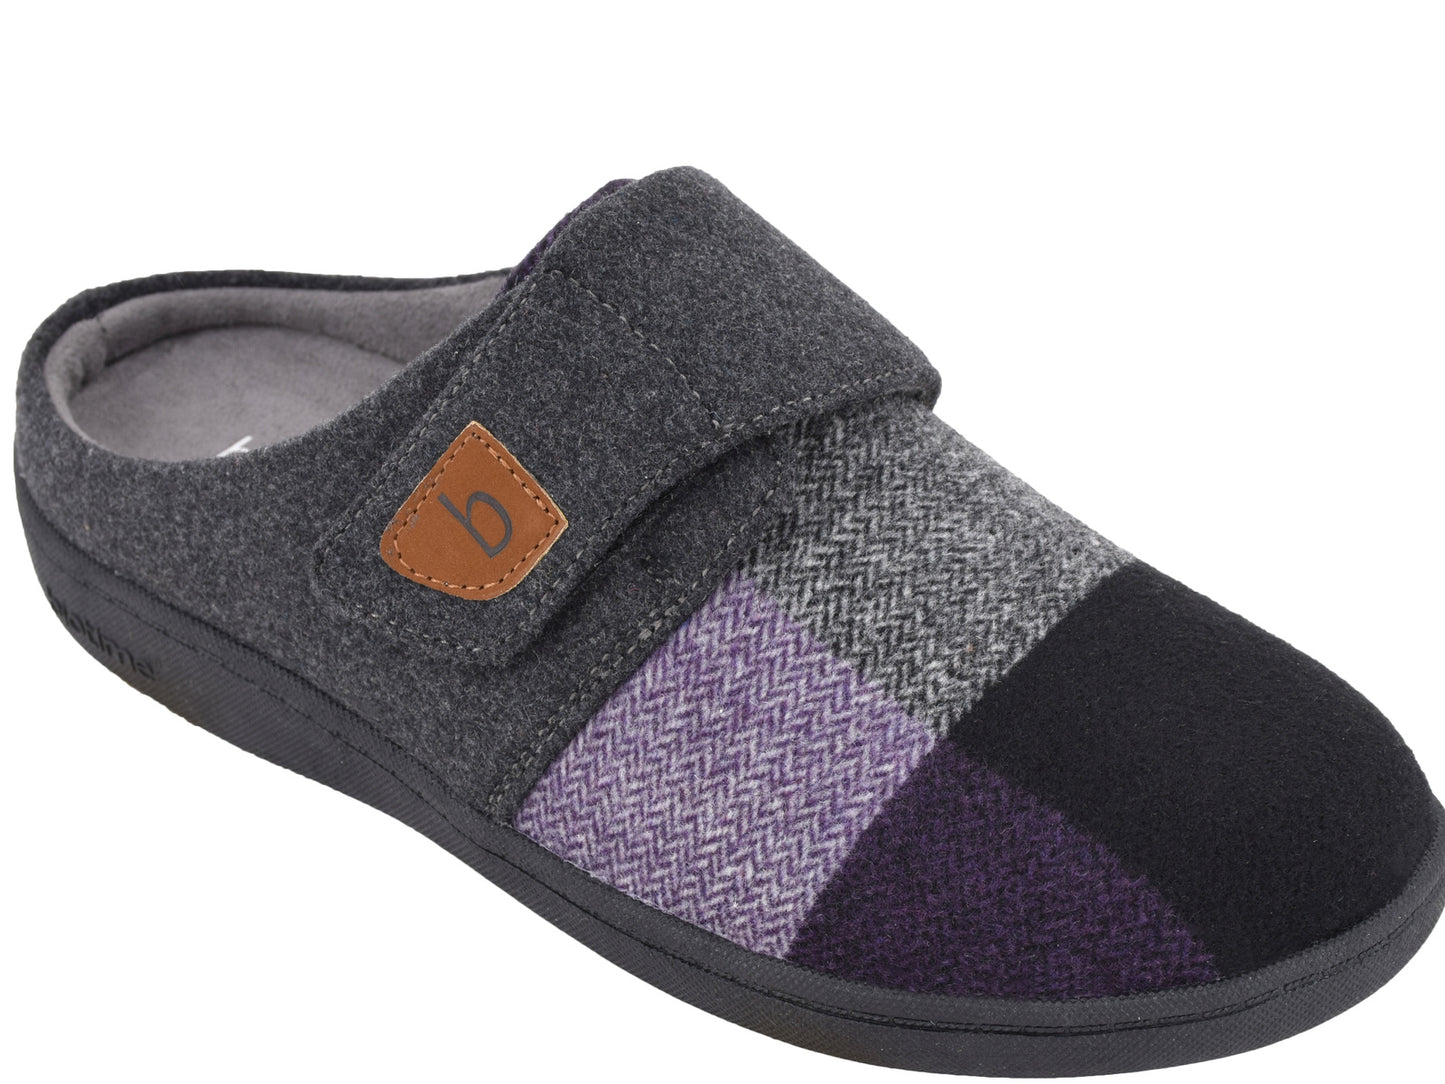 Biotime Slippers for Women - Amity